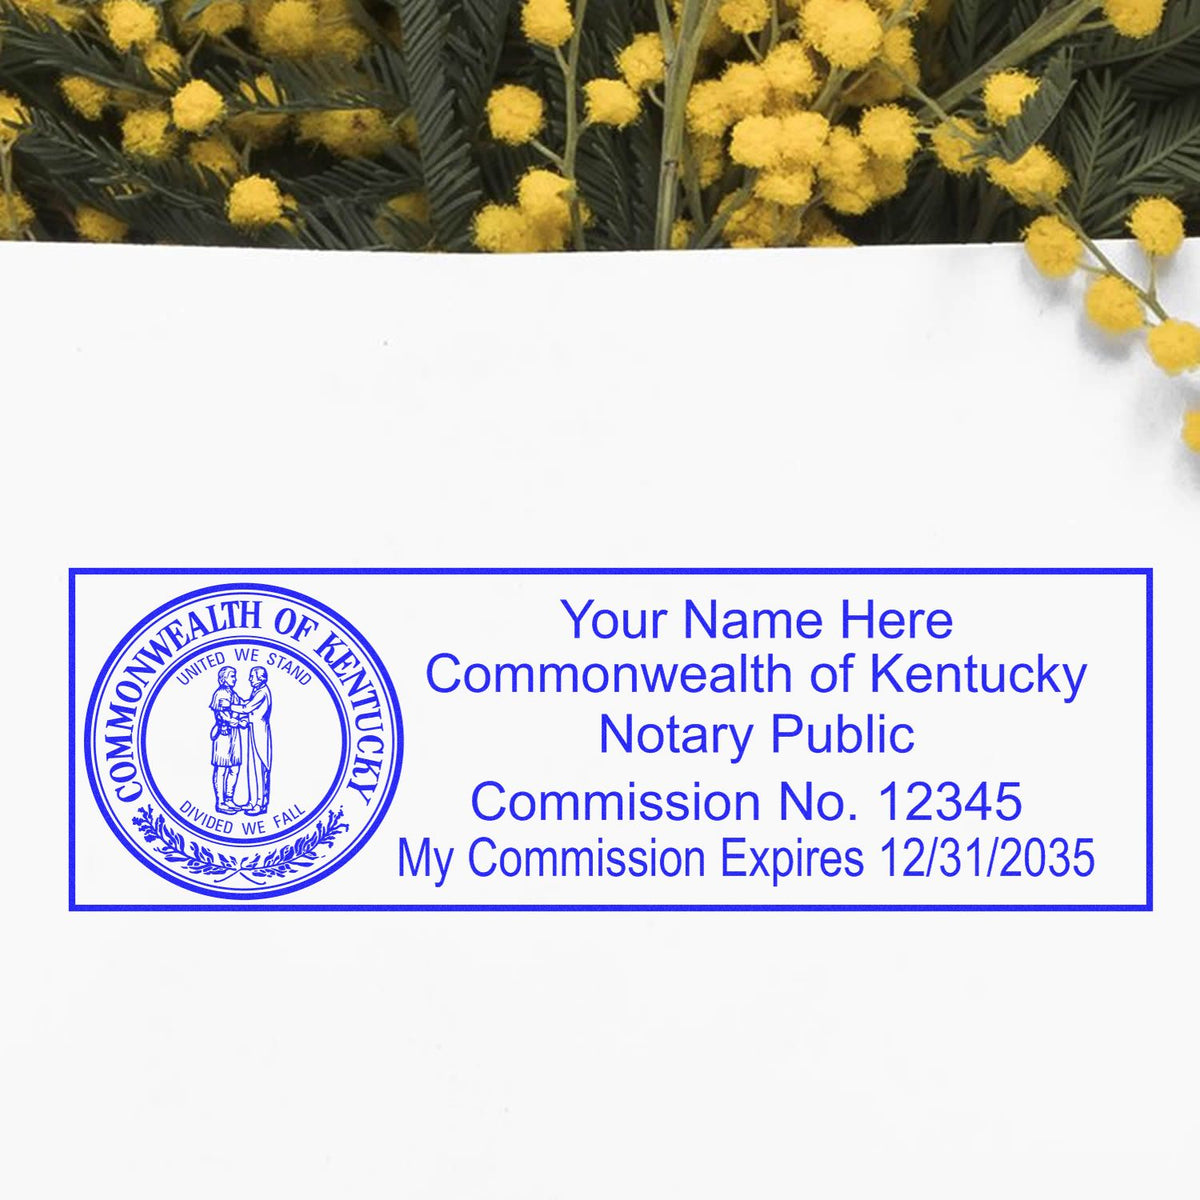 An alternative view of the Super Slim Kentucky Notary Public Stamp stamped on a sheet of paper showing the image in use